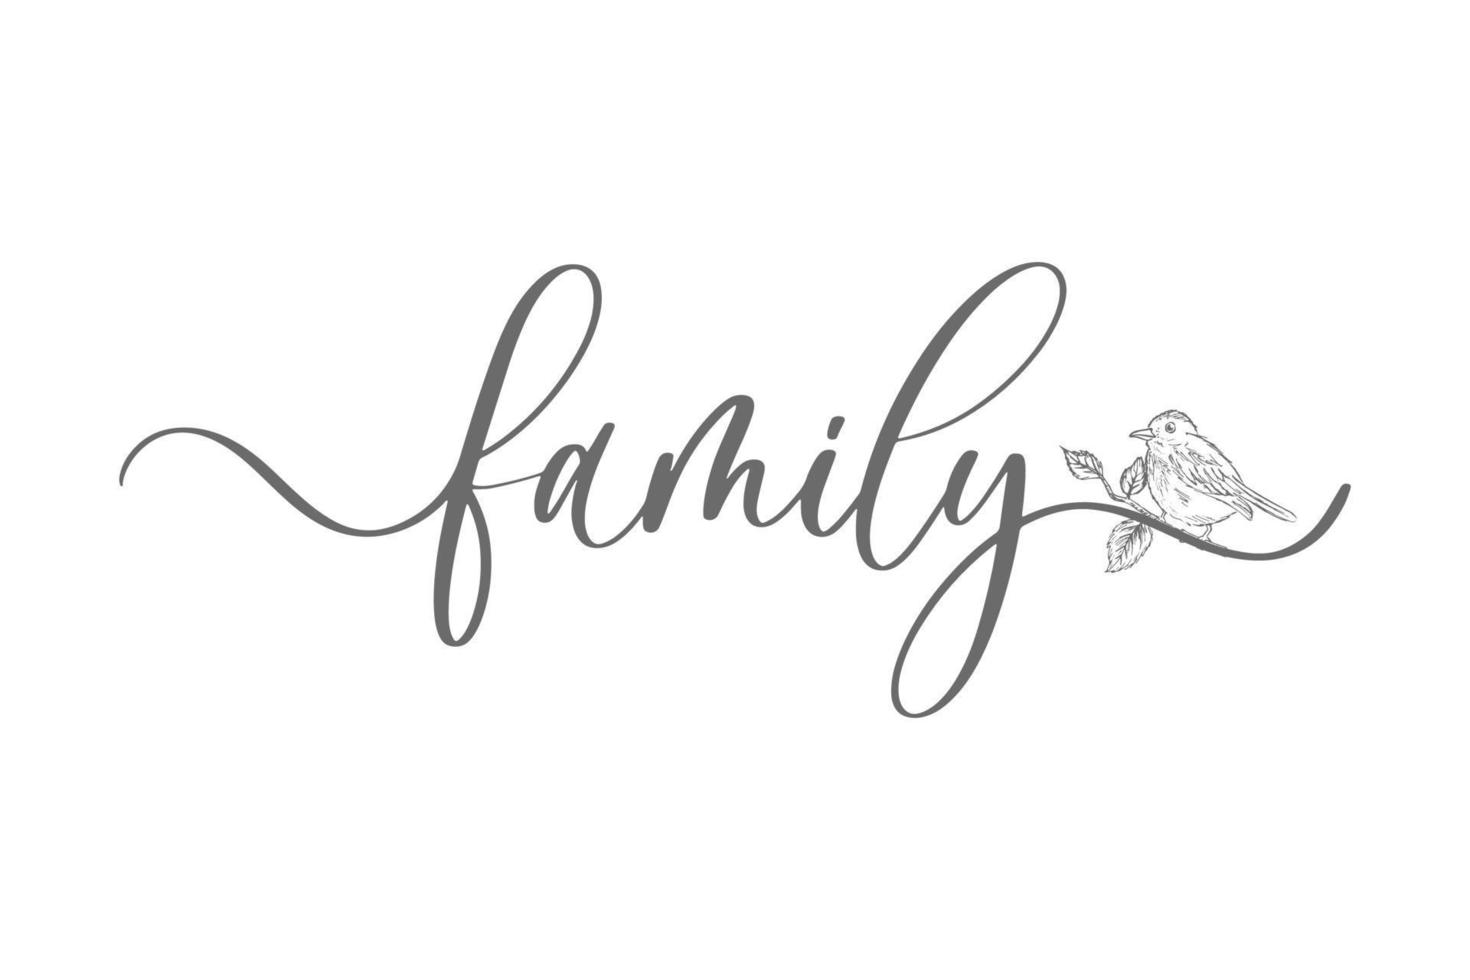 Family vector calligraphic inscription with sketch bird. Minimalistic hand lettering illustration.